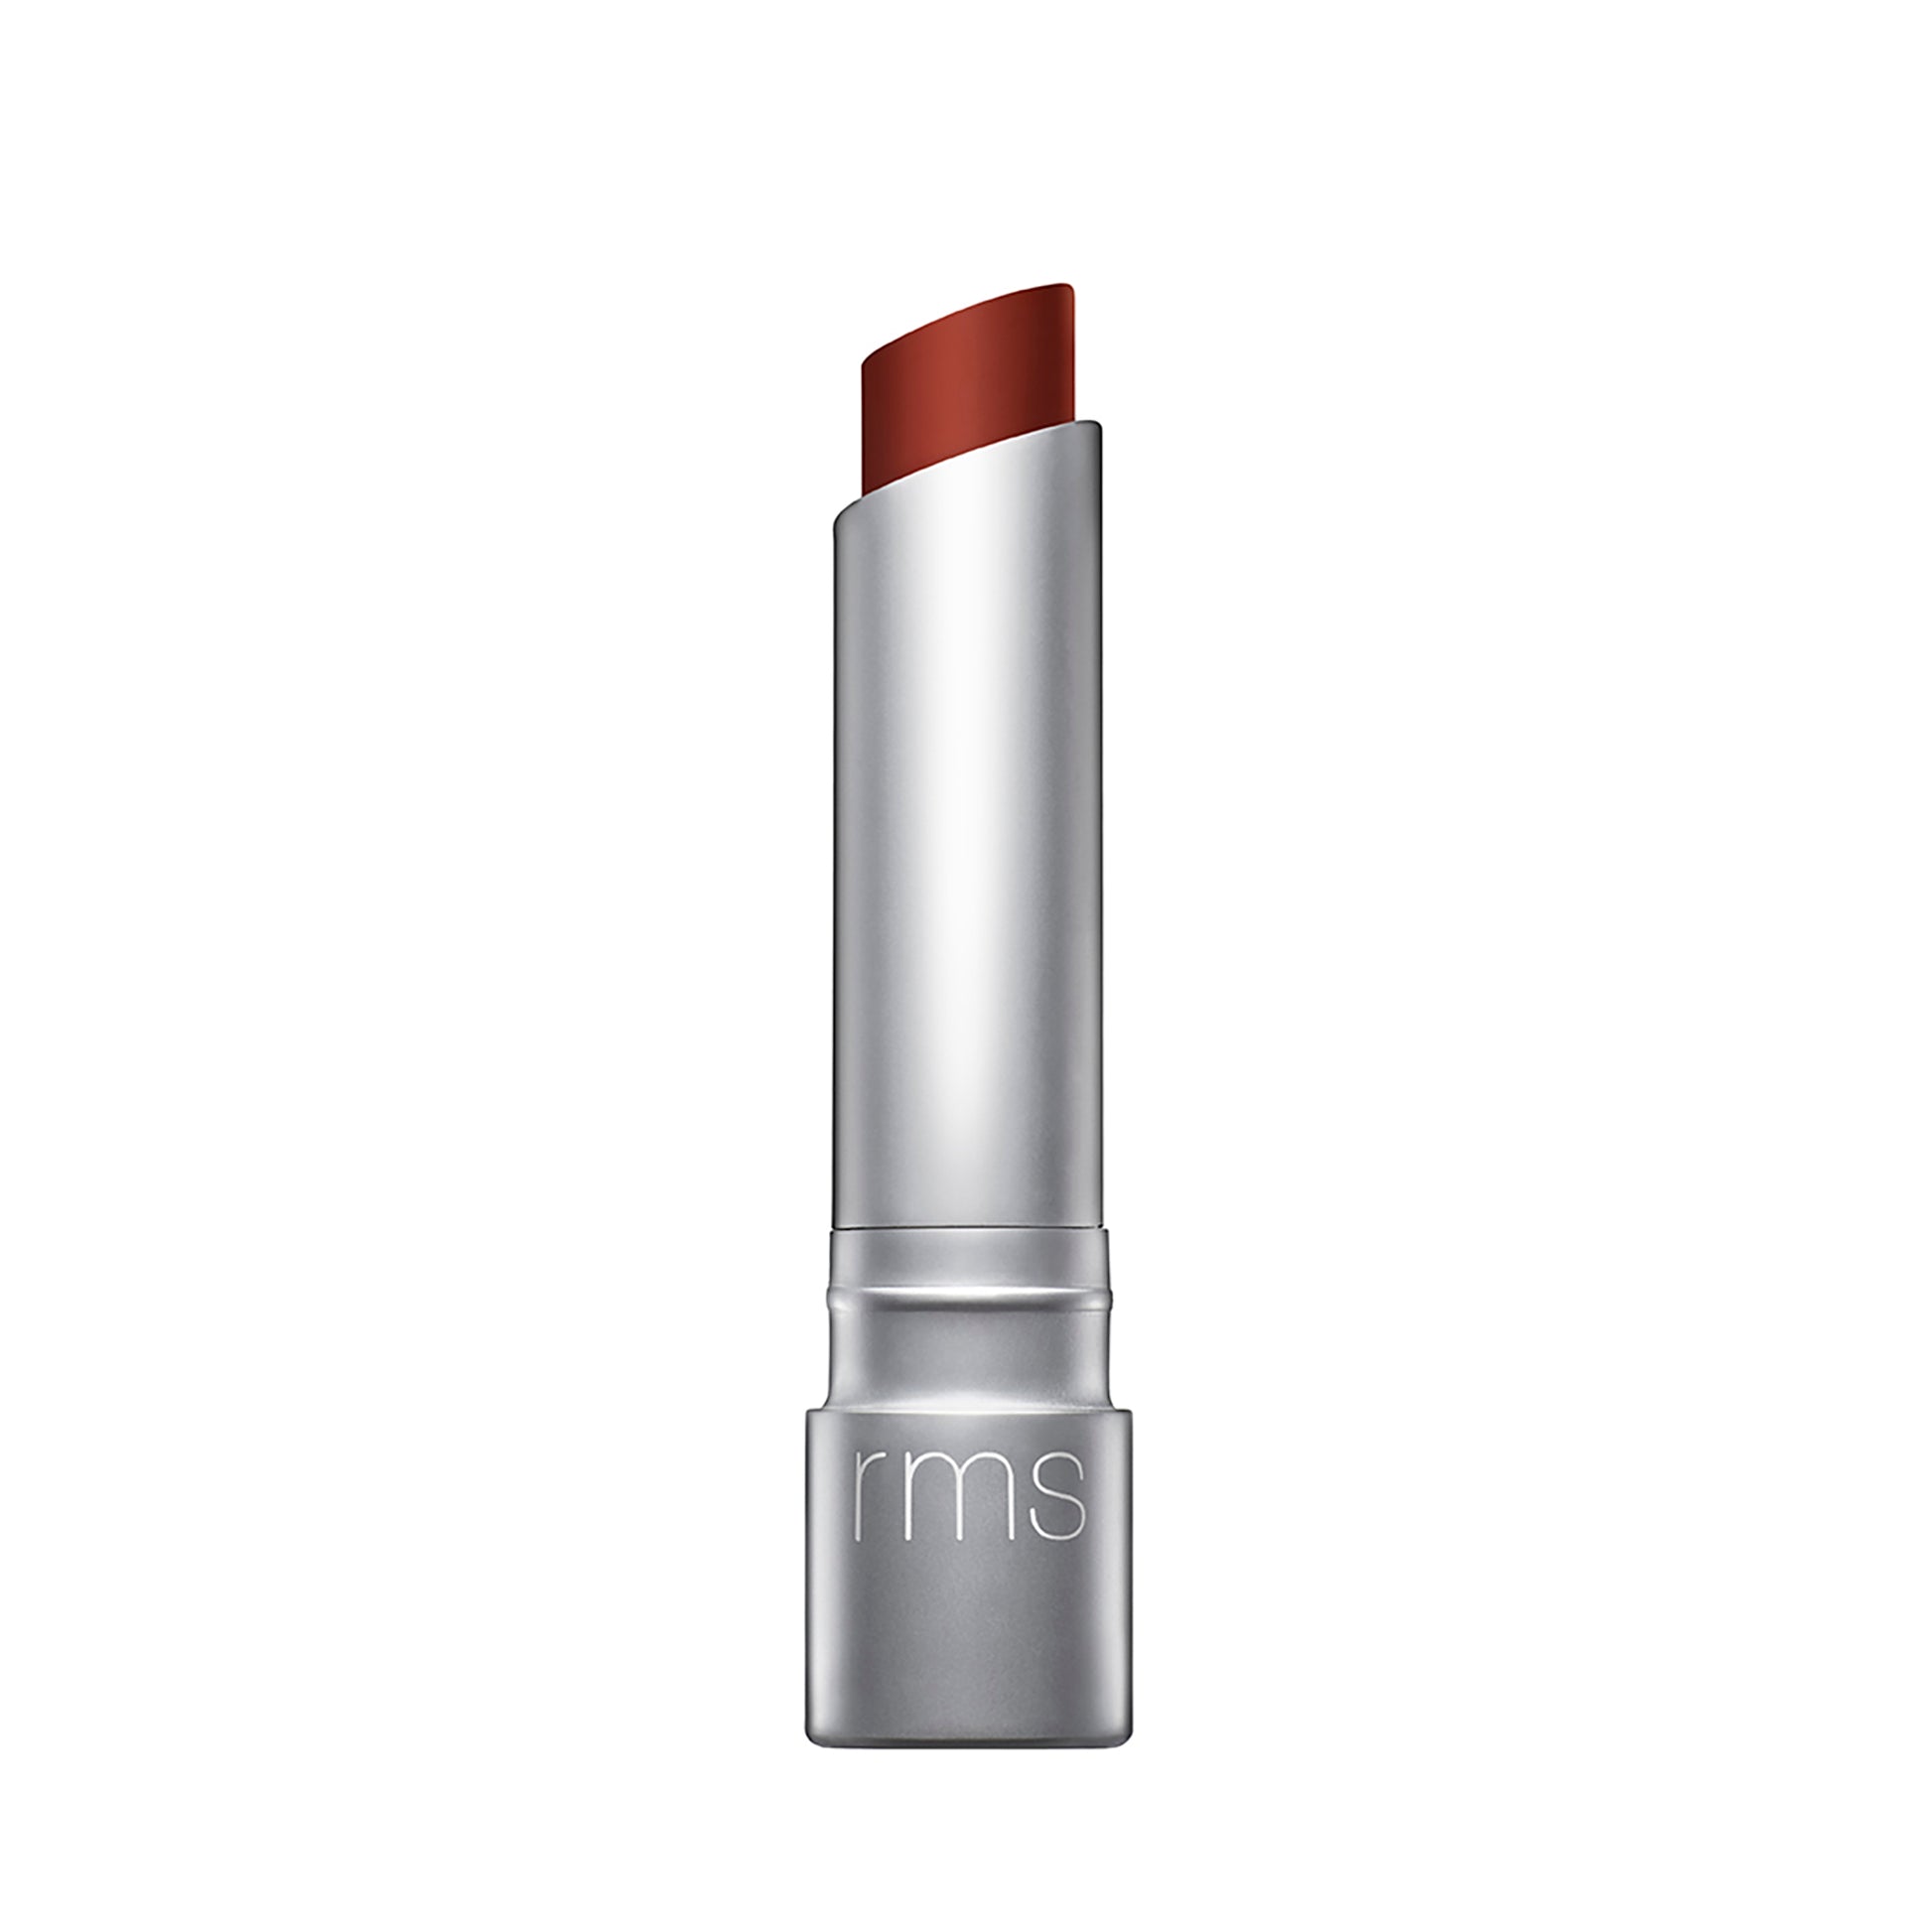 RMS BEAUTY Wild With Desire Lipstick rapture